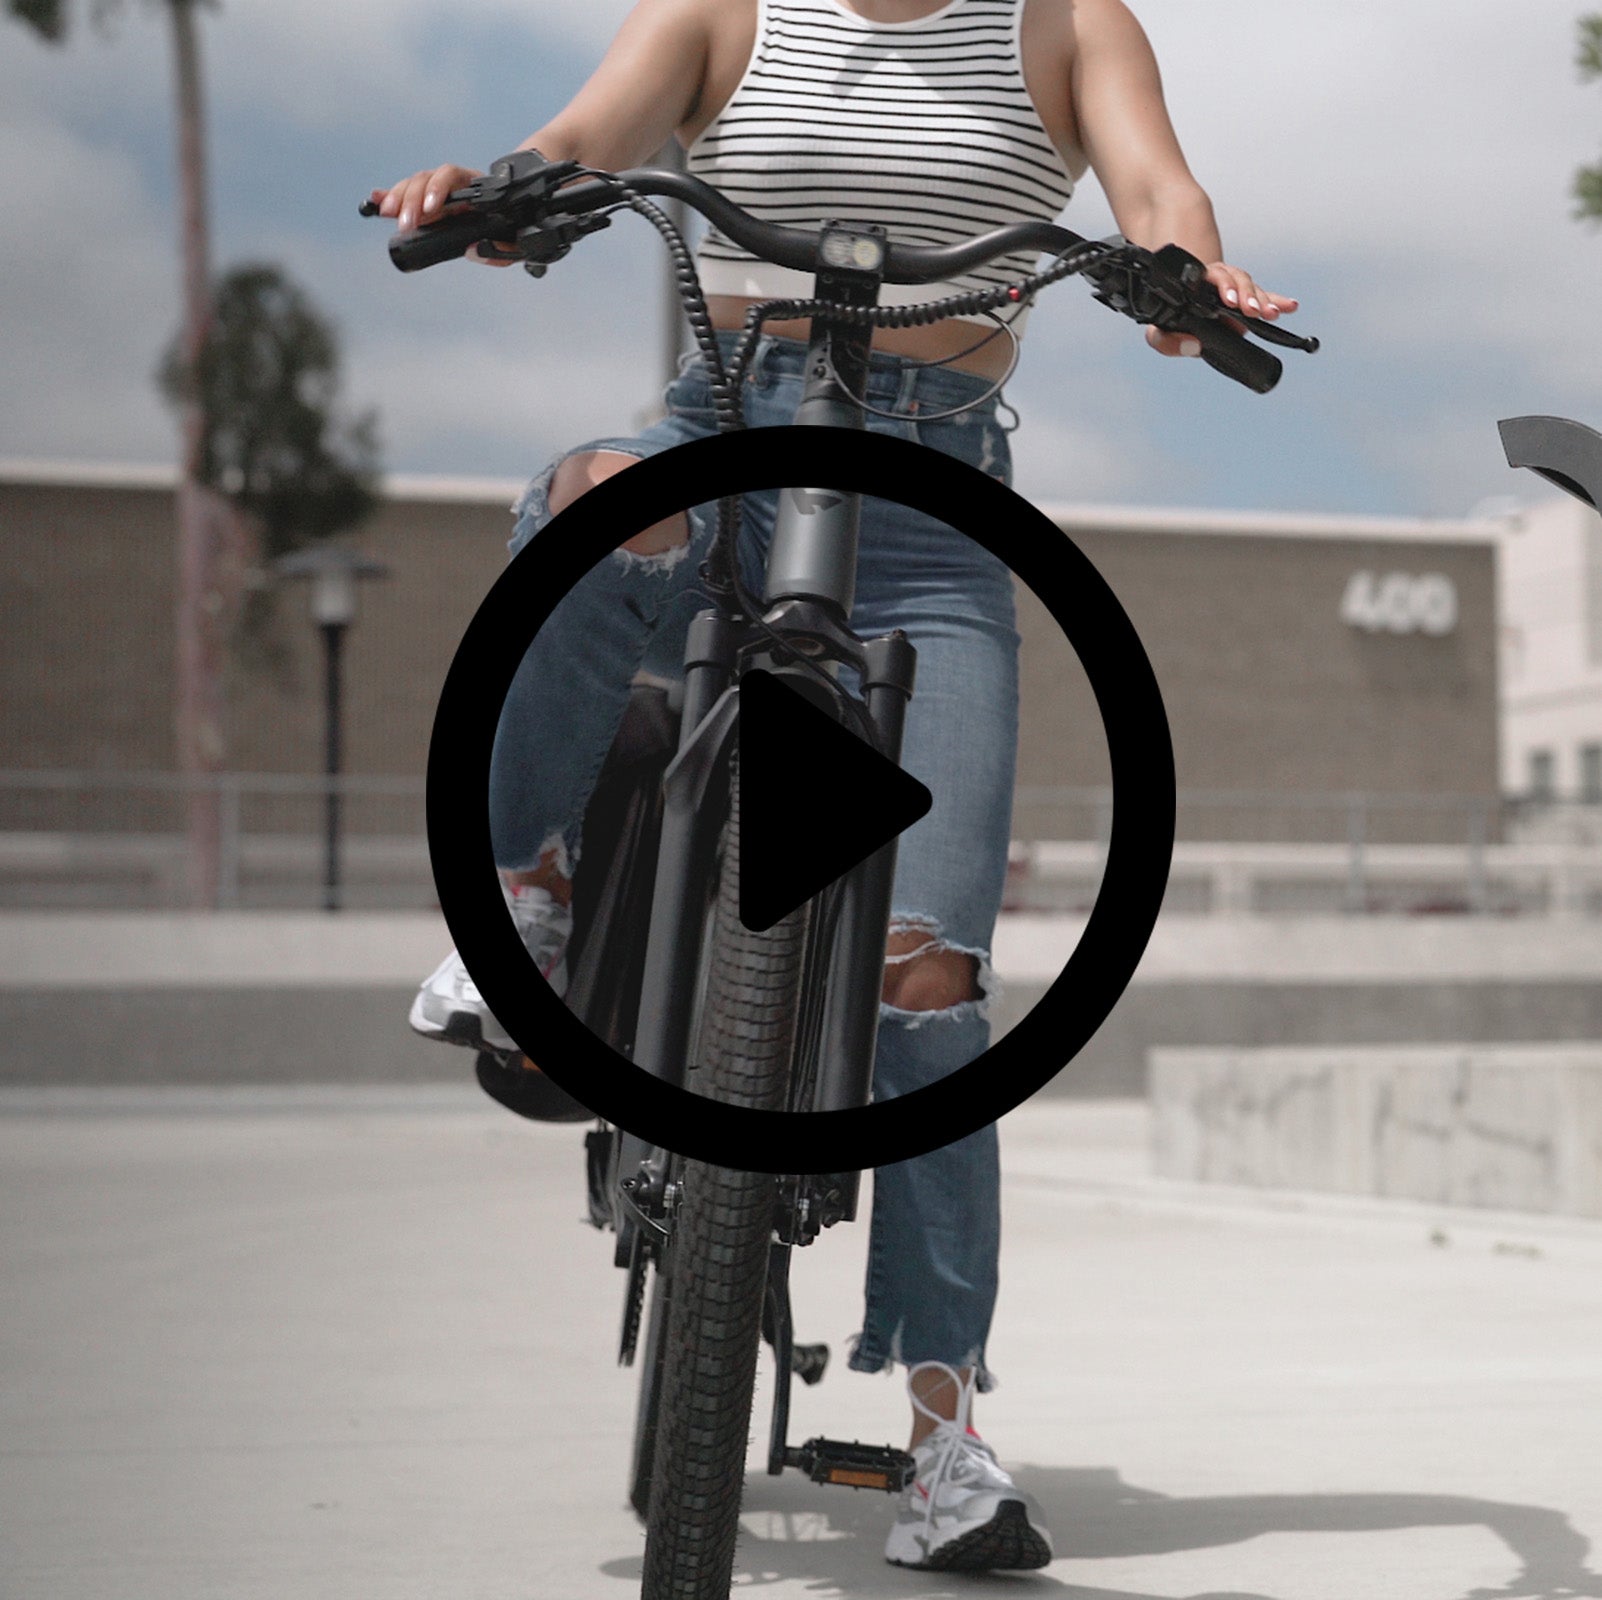 "Front view of a person riding a dark grey electric bike from FavoriteBikes on a concrete surface. The rider is wearing a striped crop top, ripped blue jeans, and white sneakers. The bike features a robust frame, wide tires, and a bright headlight, and the rider appears to be enjoying a casual ride in an urban setting."